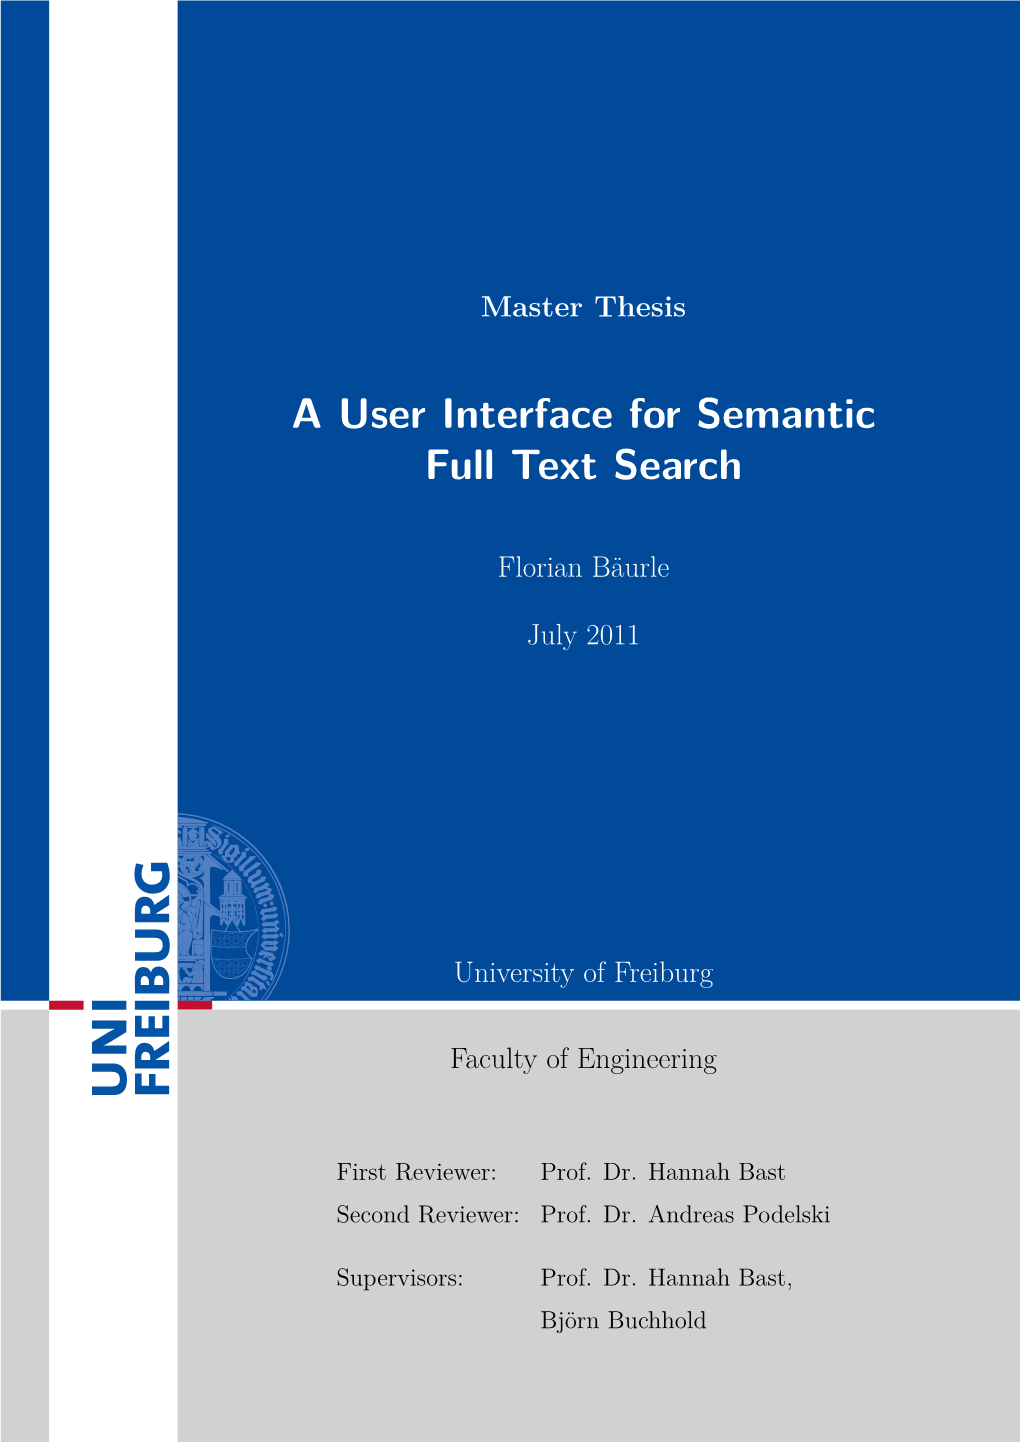 A User Interface for Semantic Full Text Search